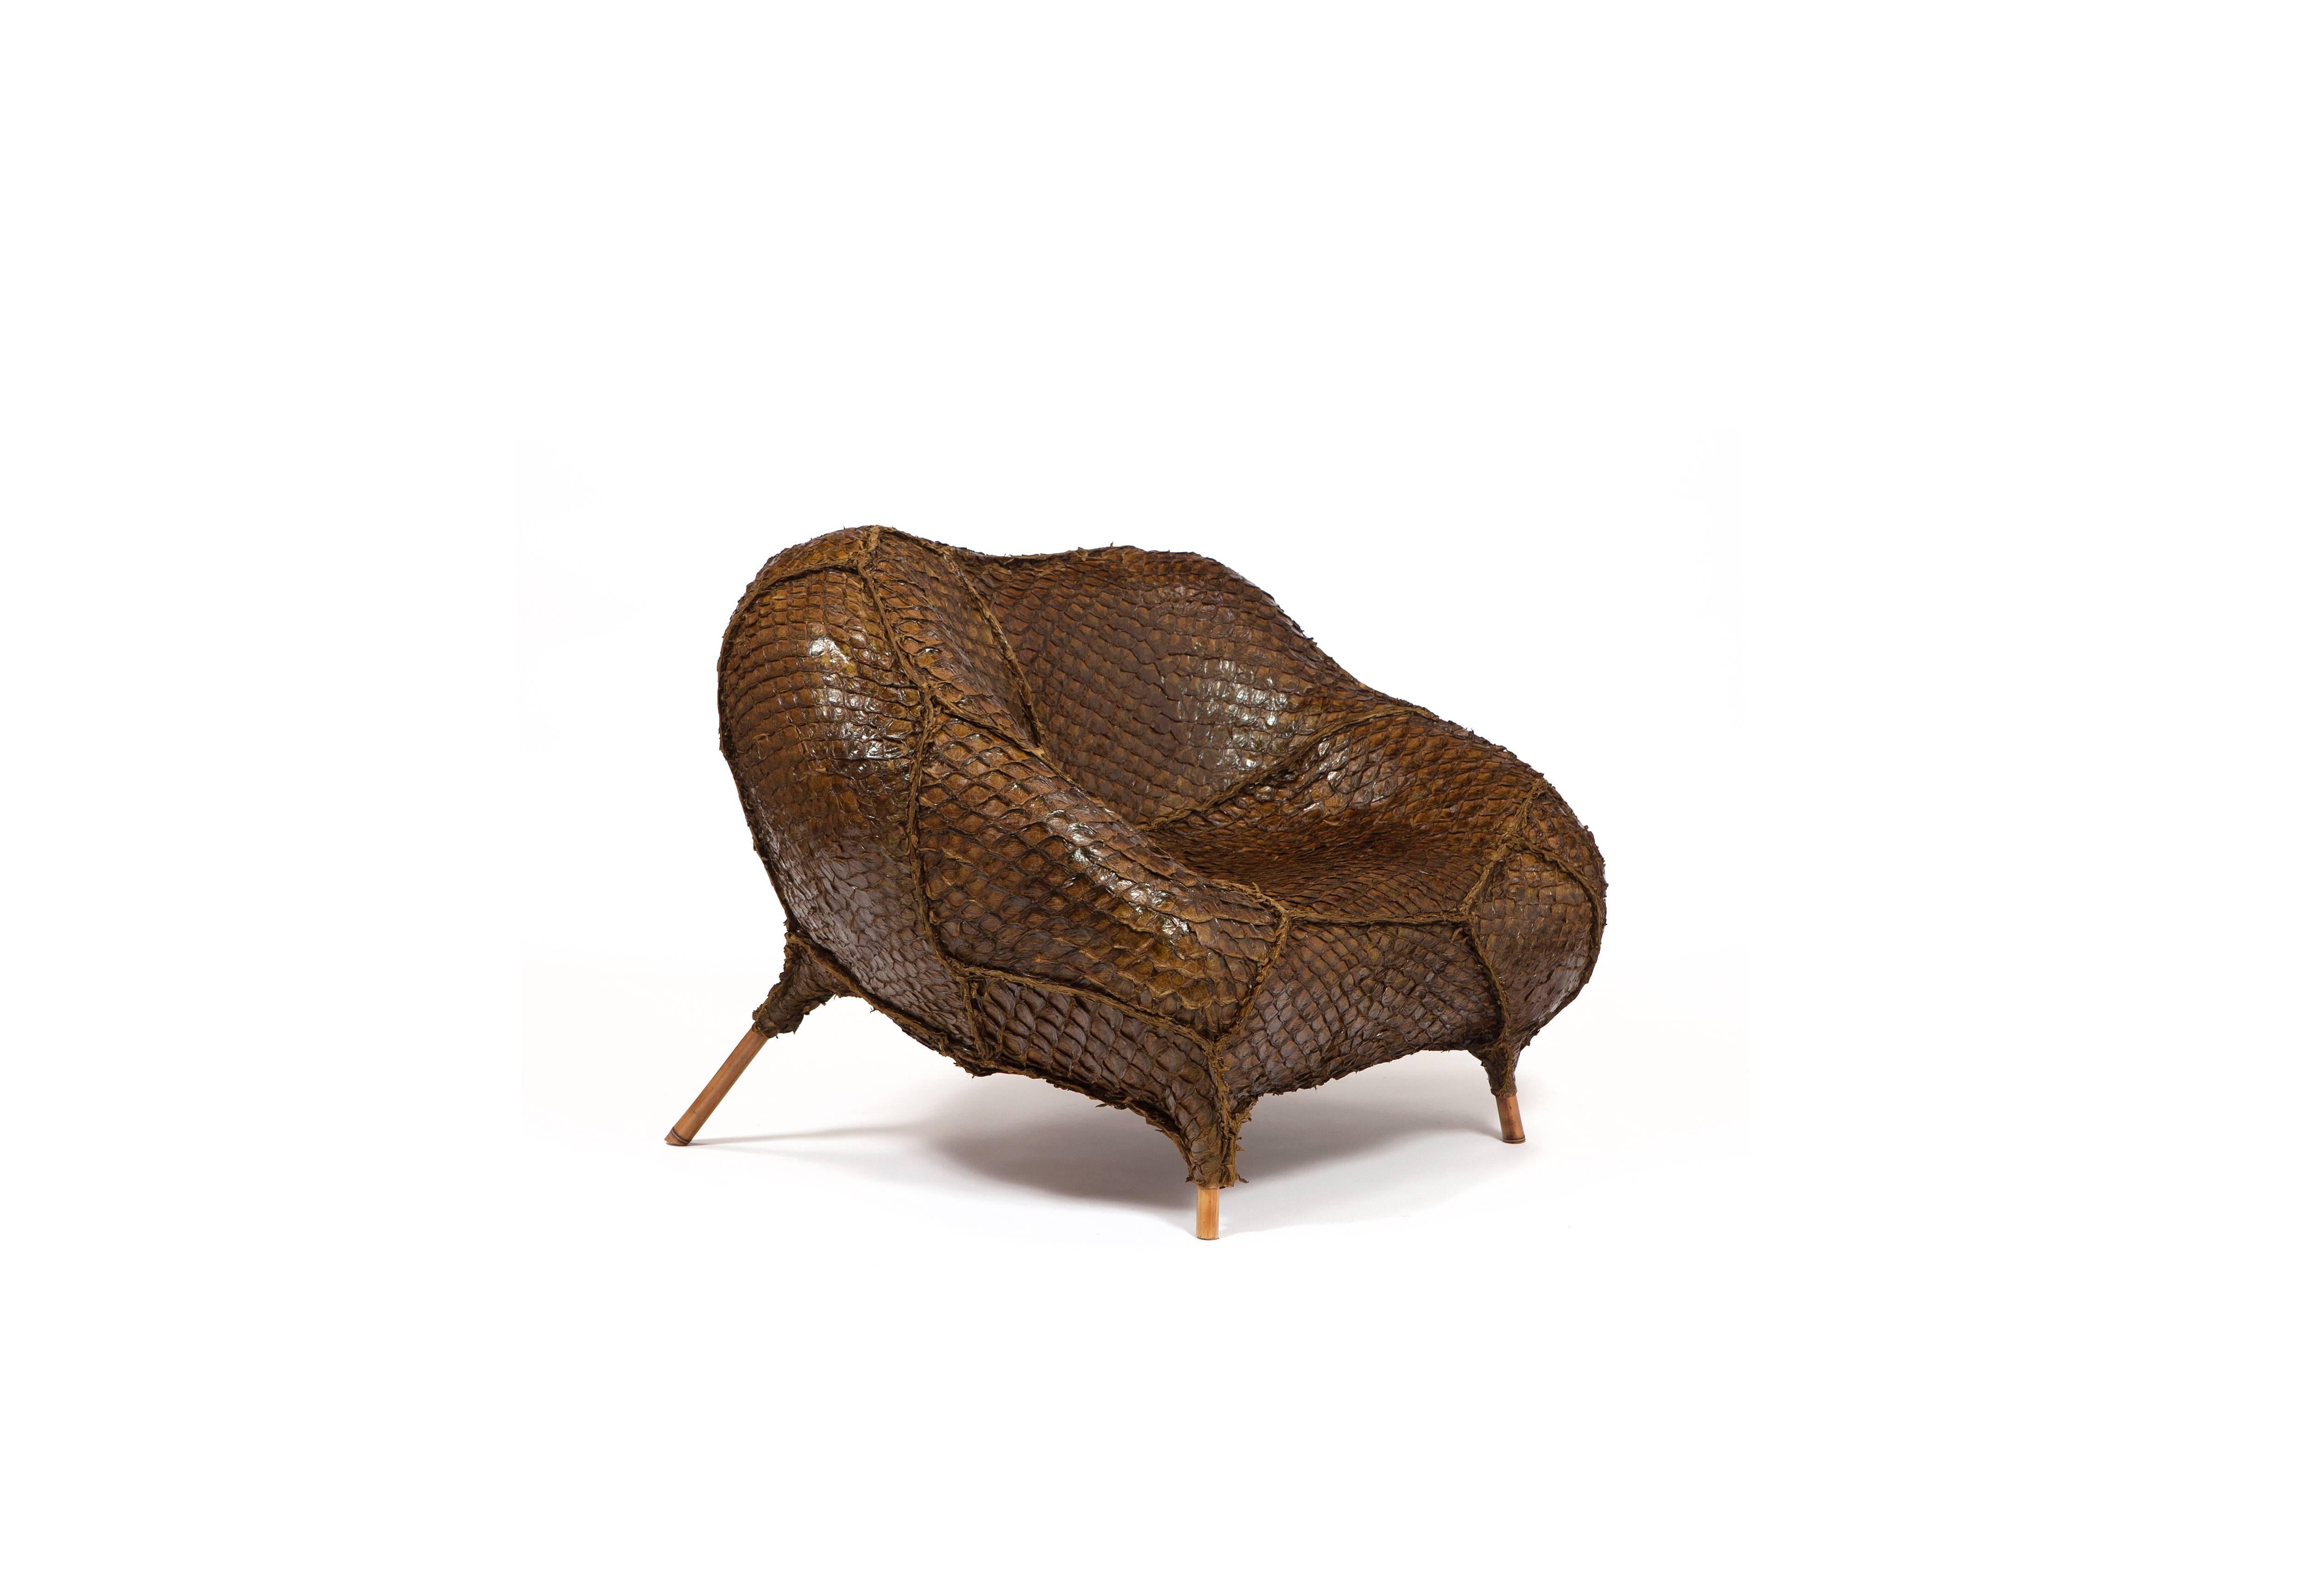 Brazilian design duo and brothers Fernando and Humberto Campana created this armchair using leather from the skin of a pirarucu fish. This Amazonian fish is one of the largest types of fresh water fish in the world.

The Campana Brothers, Fernando